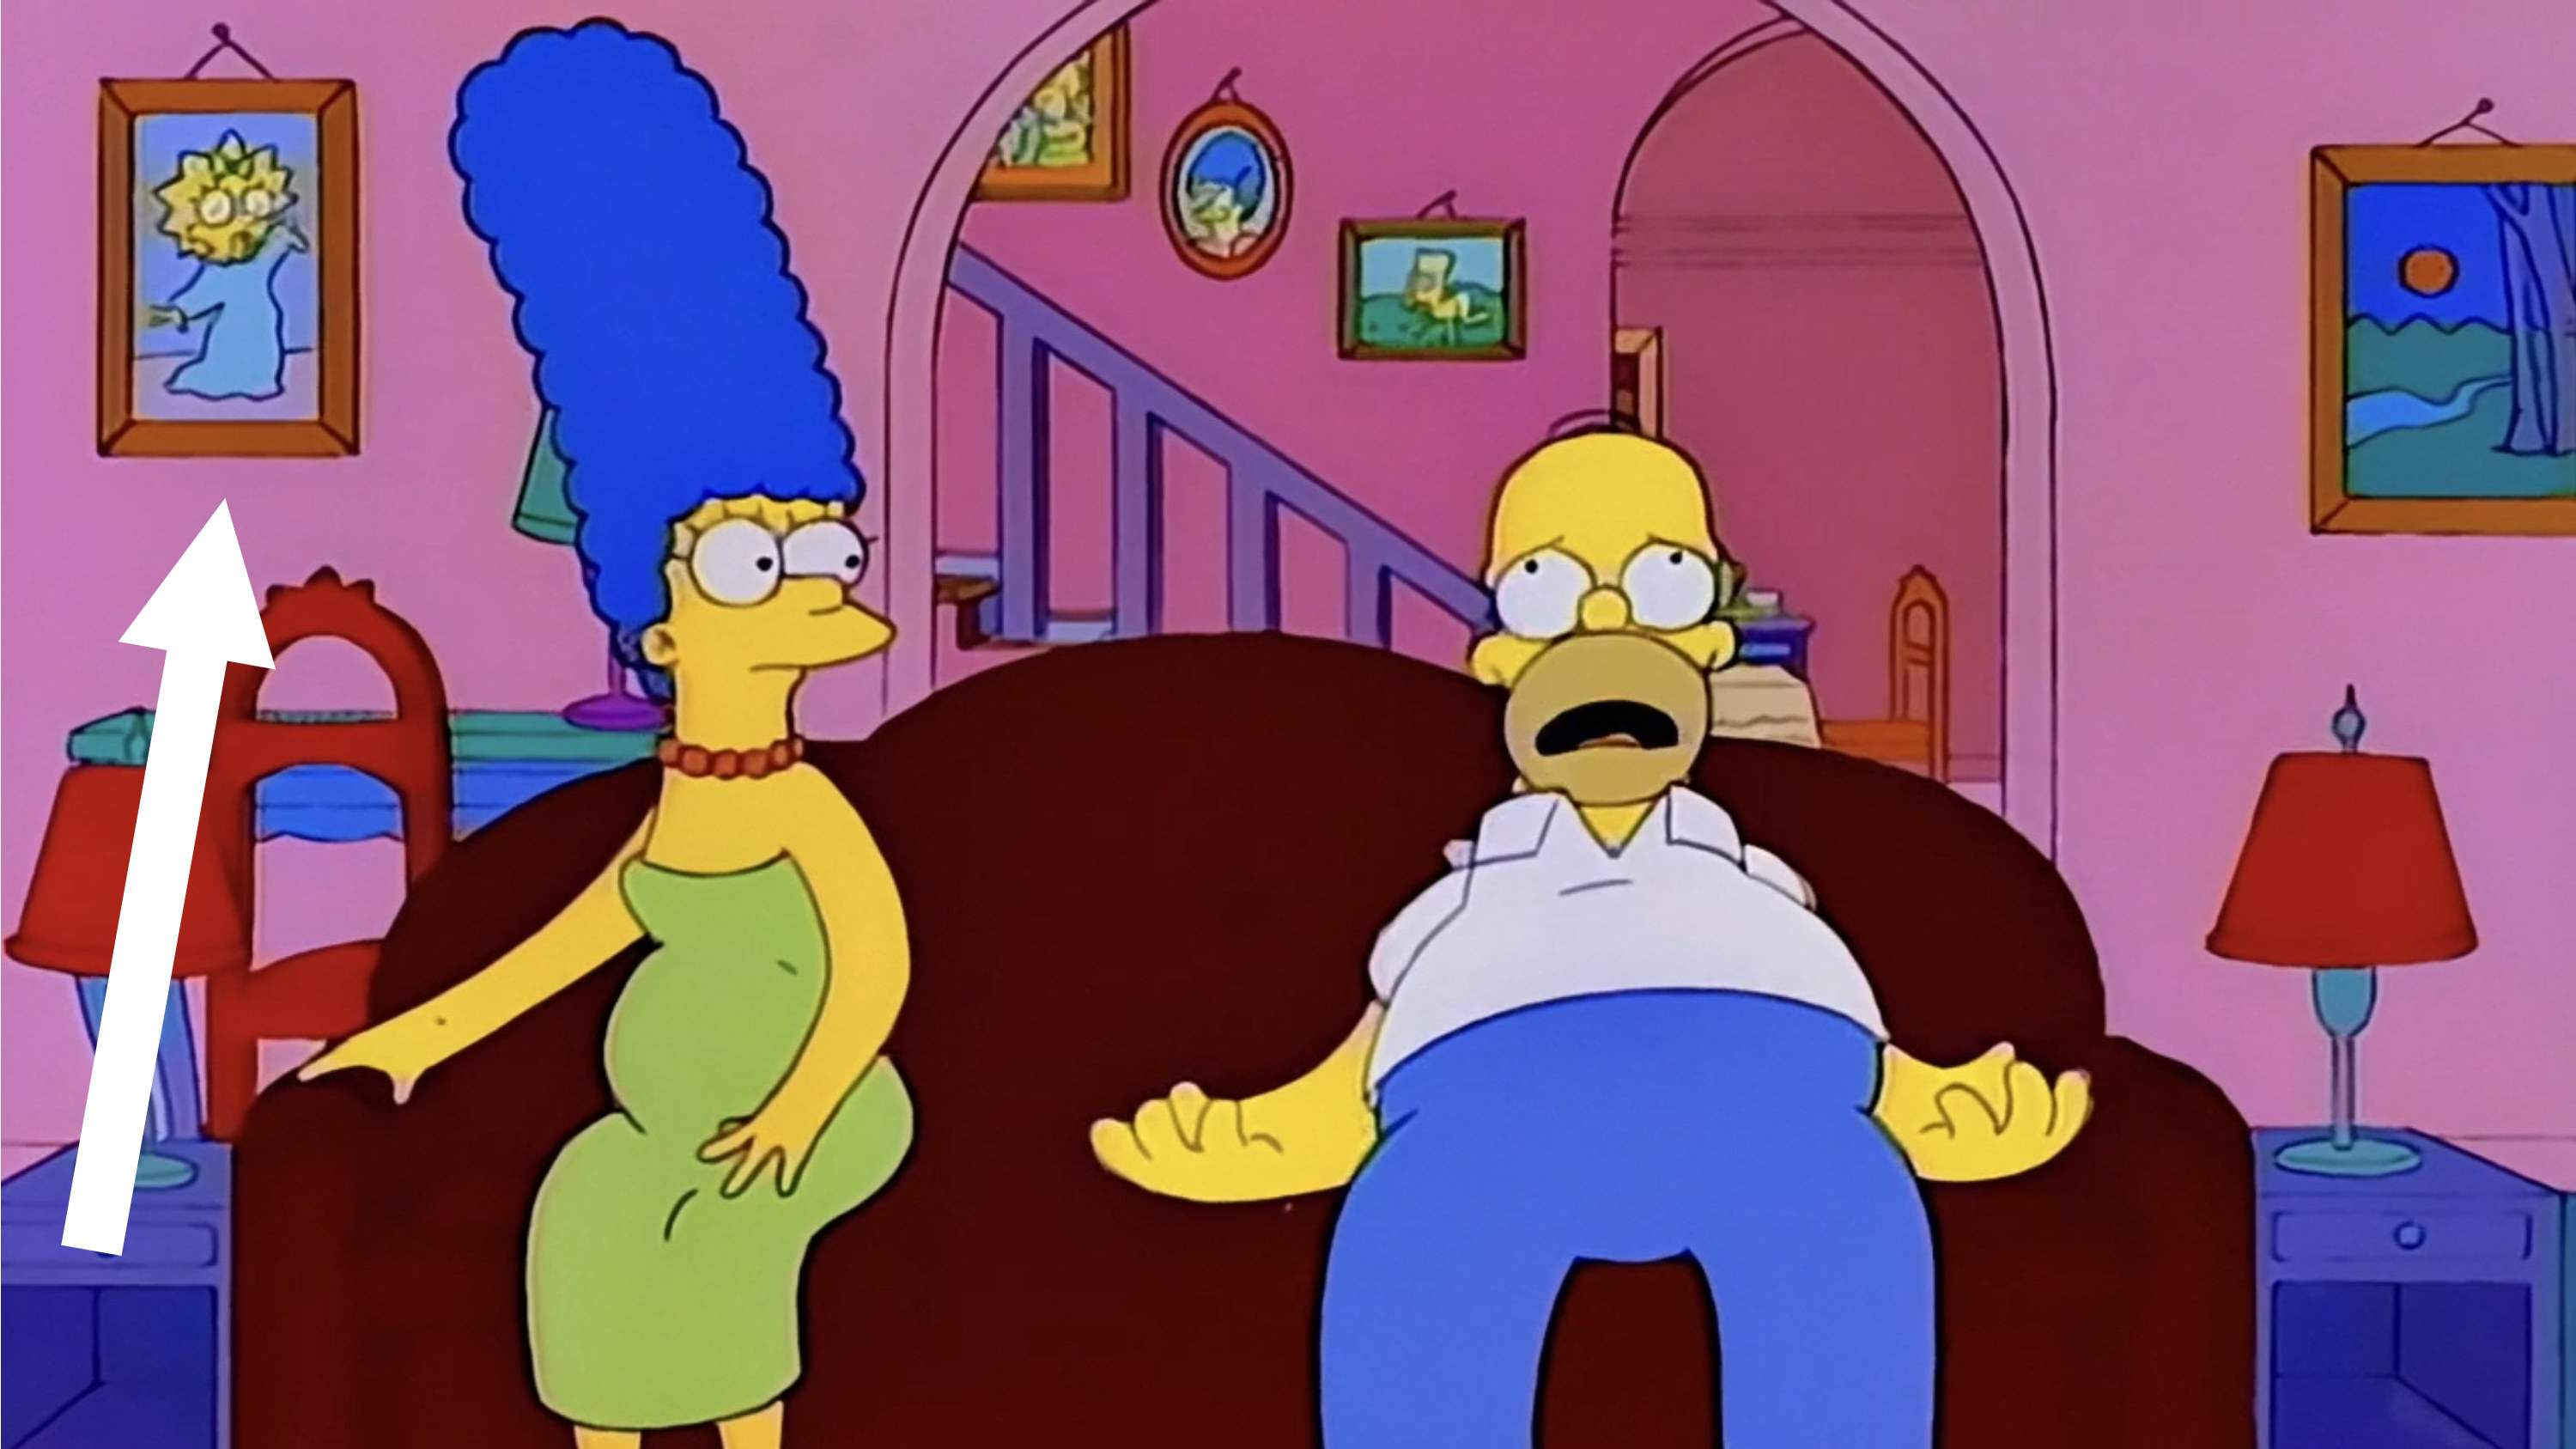 In Season 6, during a flashback episode where Marge is pregnant with Maggie